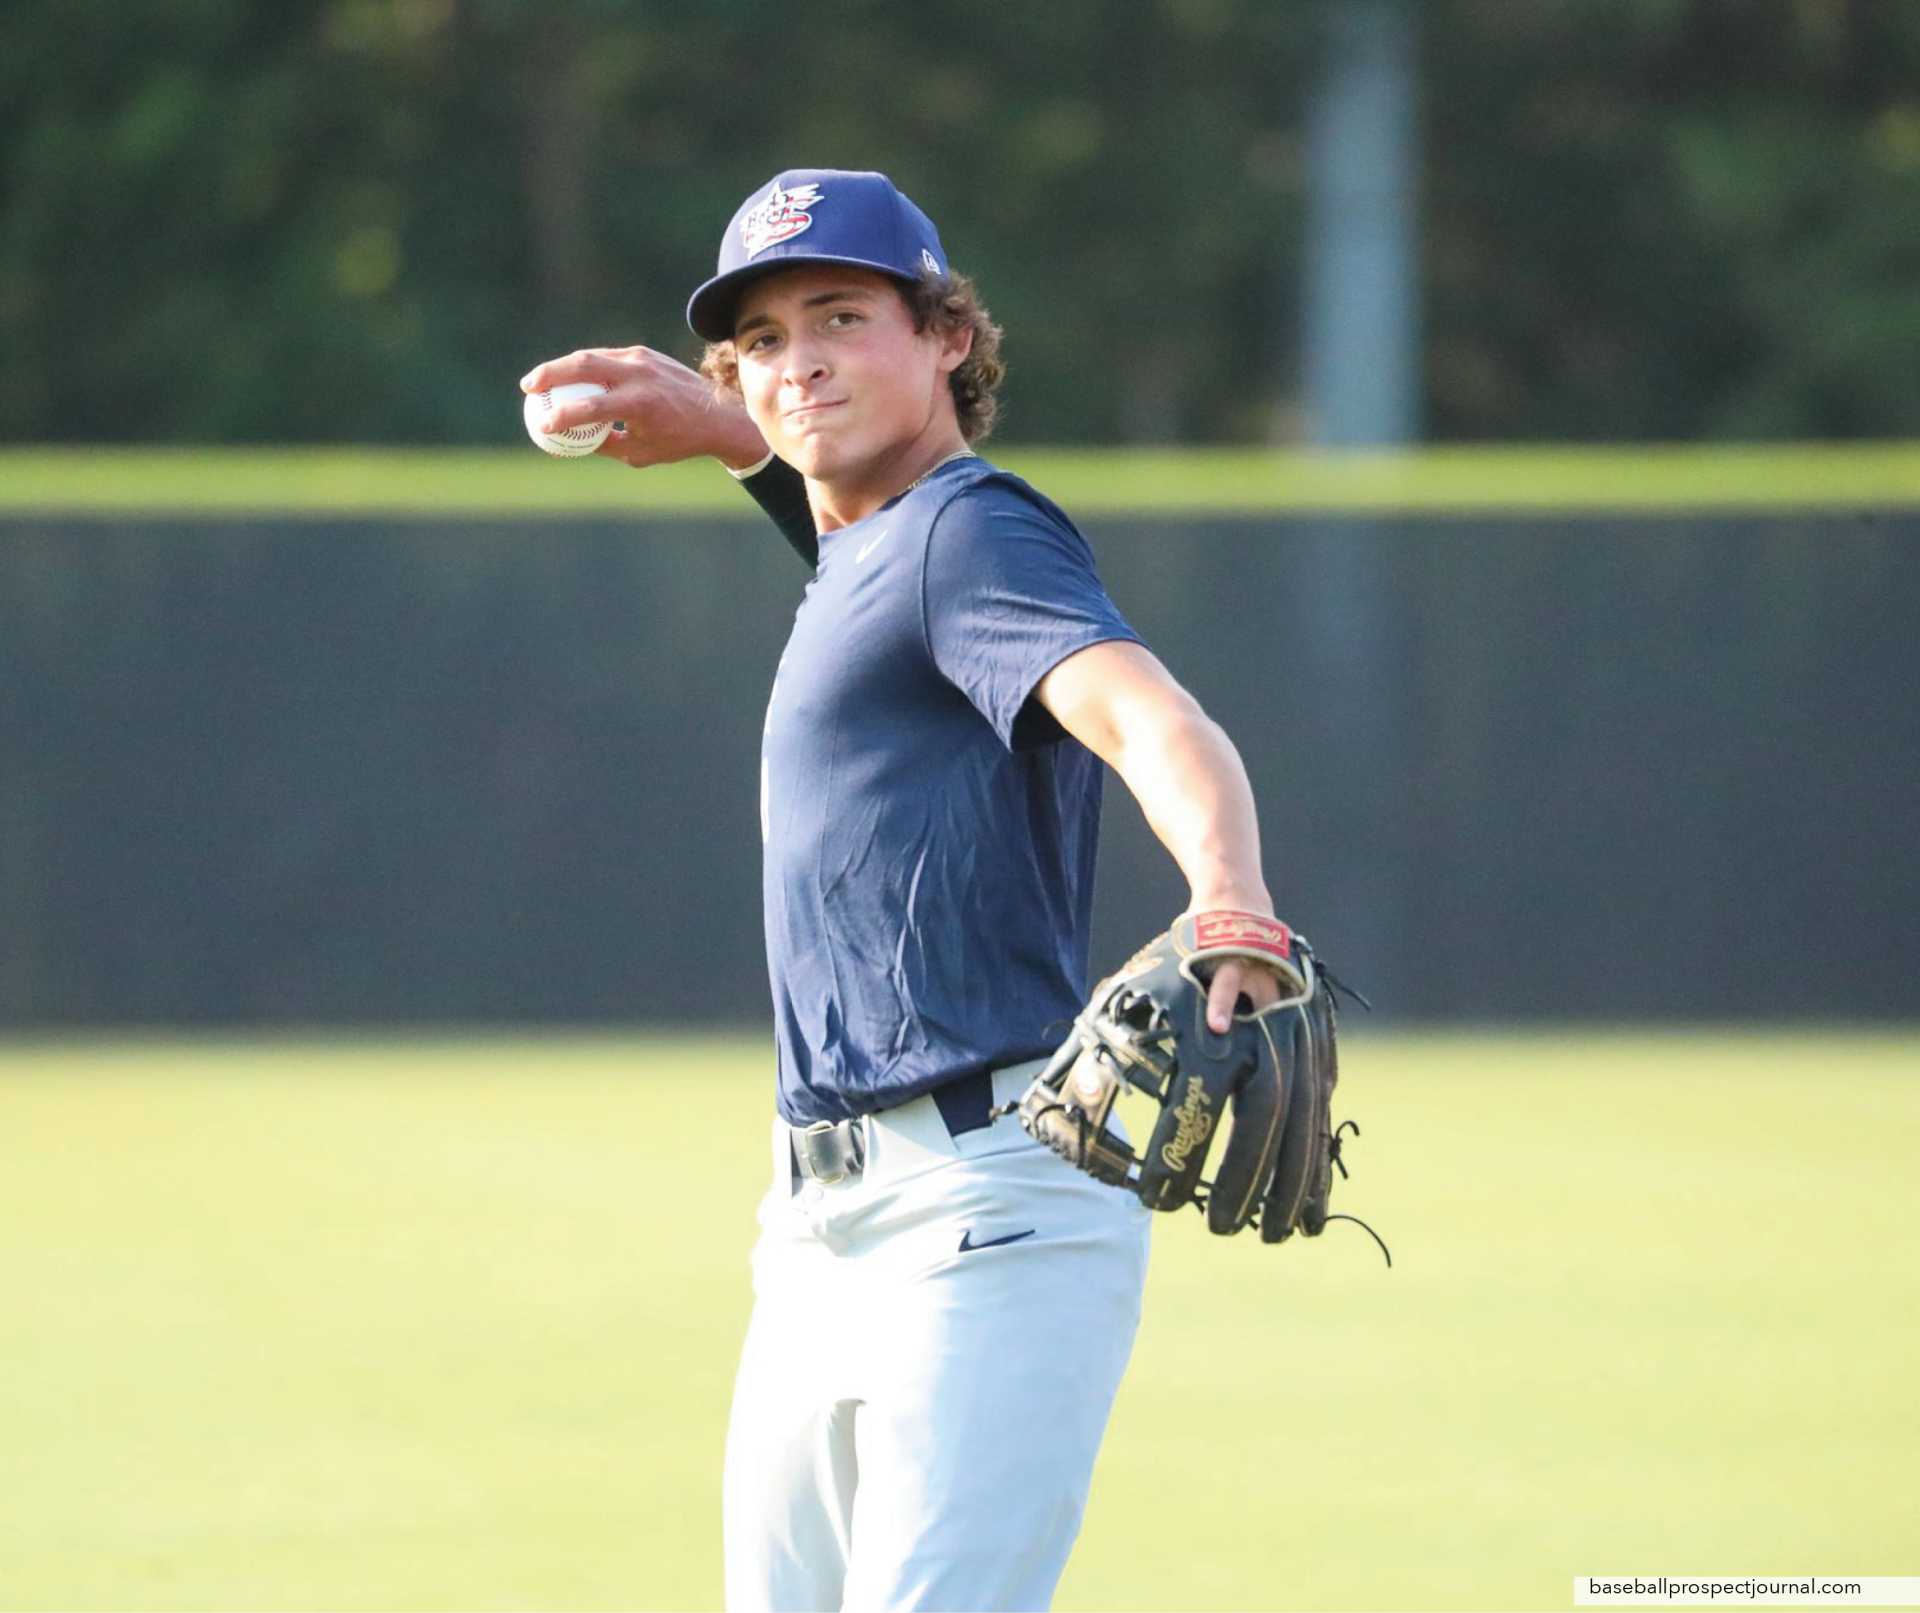 Top 2022 MLB Draft Prospects From California ITG Next